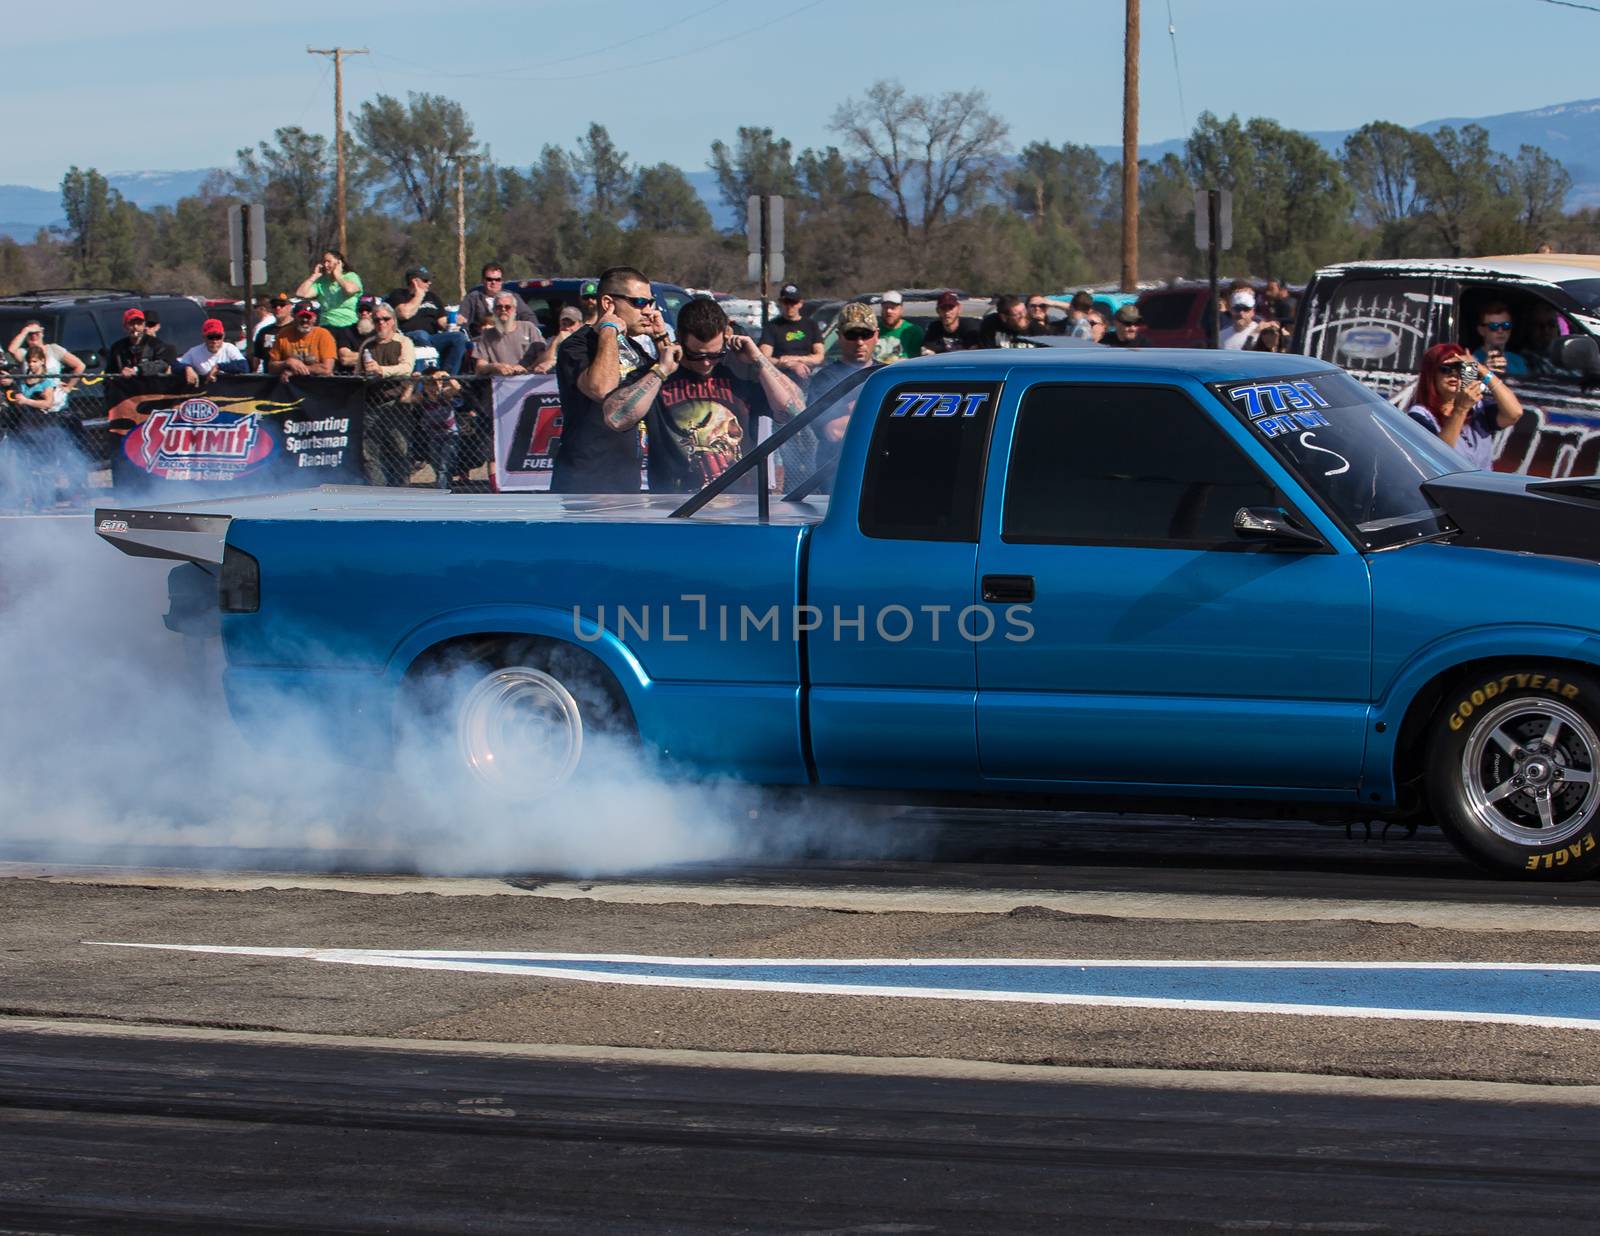 Redding, California: A blue truck burns rubber to get better friction for it's tires before a drag race.
Photo taken on: February 13th, 2016